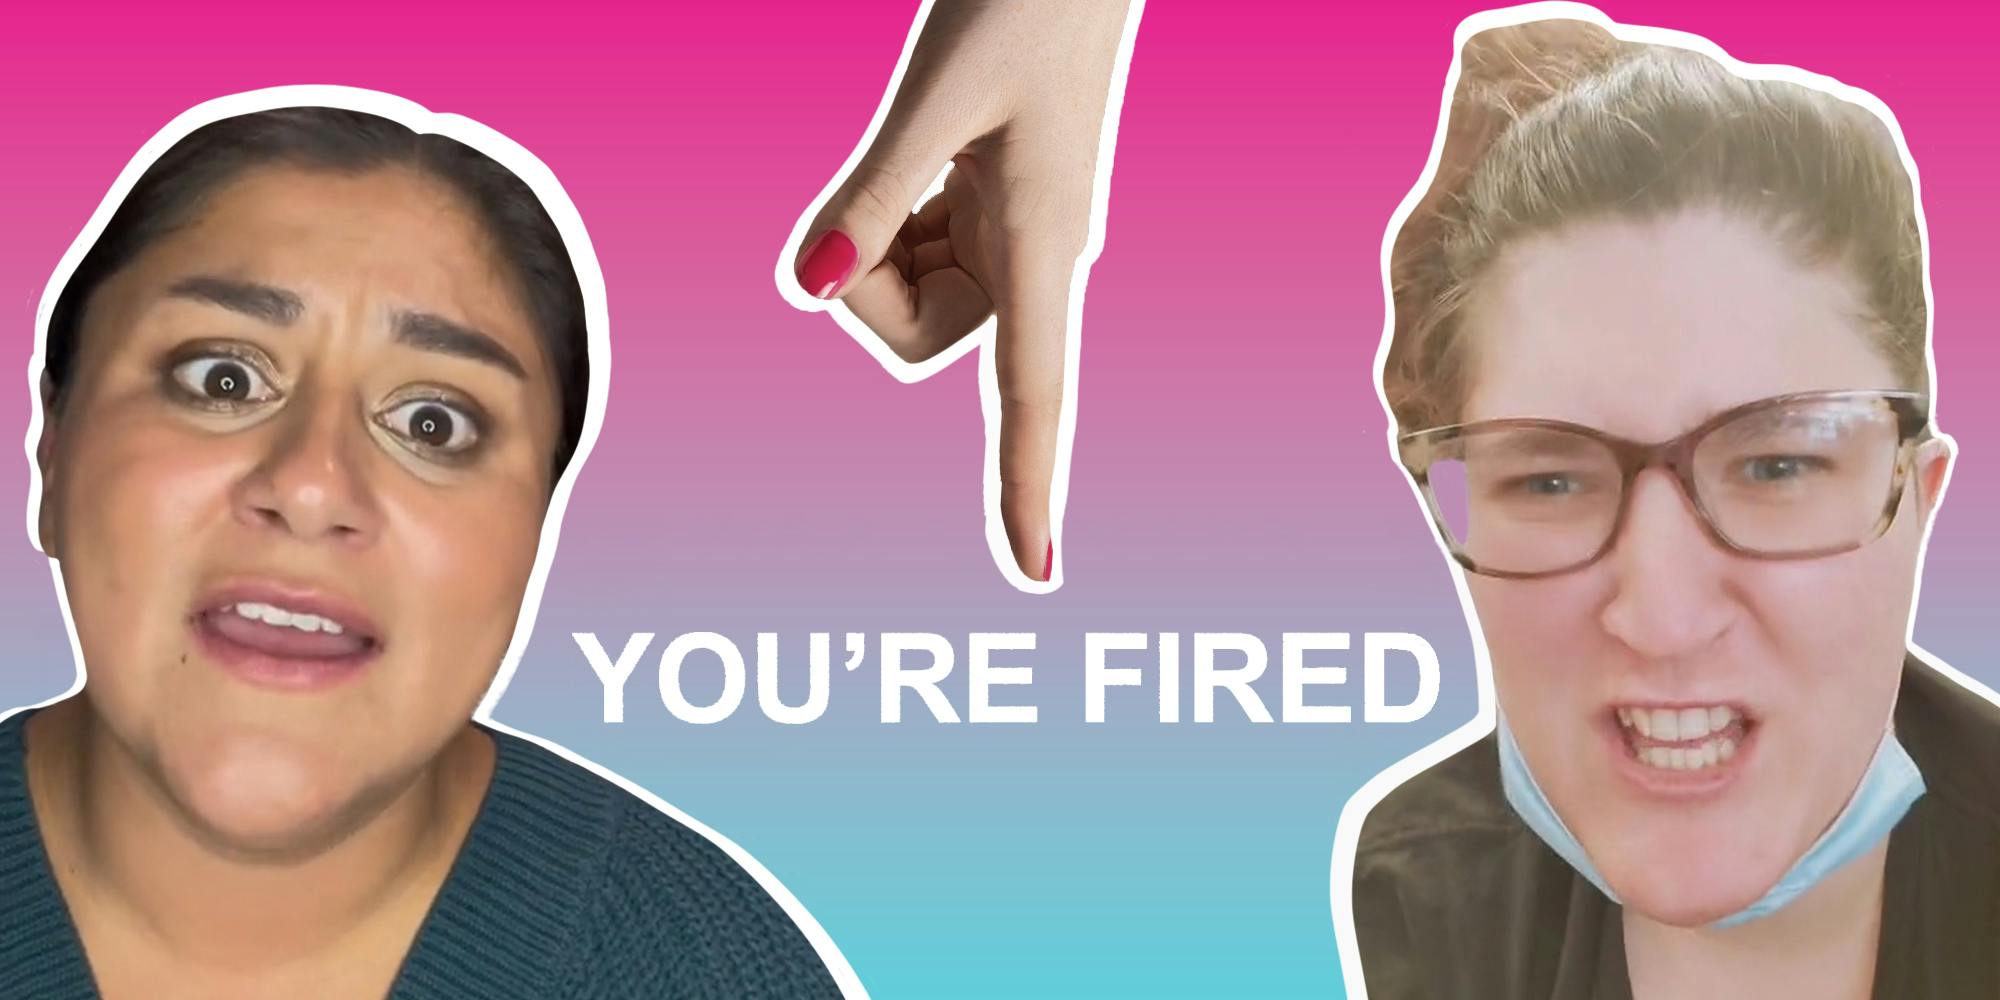 TikTok creators in front of pink to blue gradient background with hand pointing to centered caption "YOU'RE FIRED"